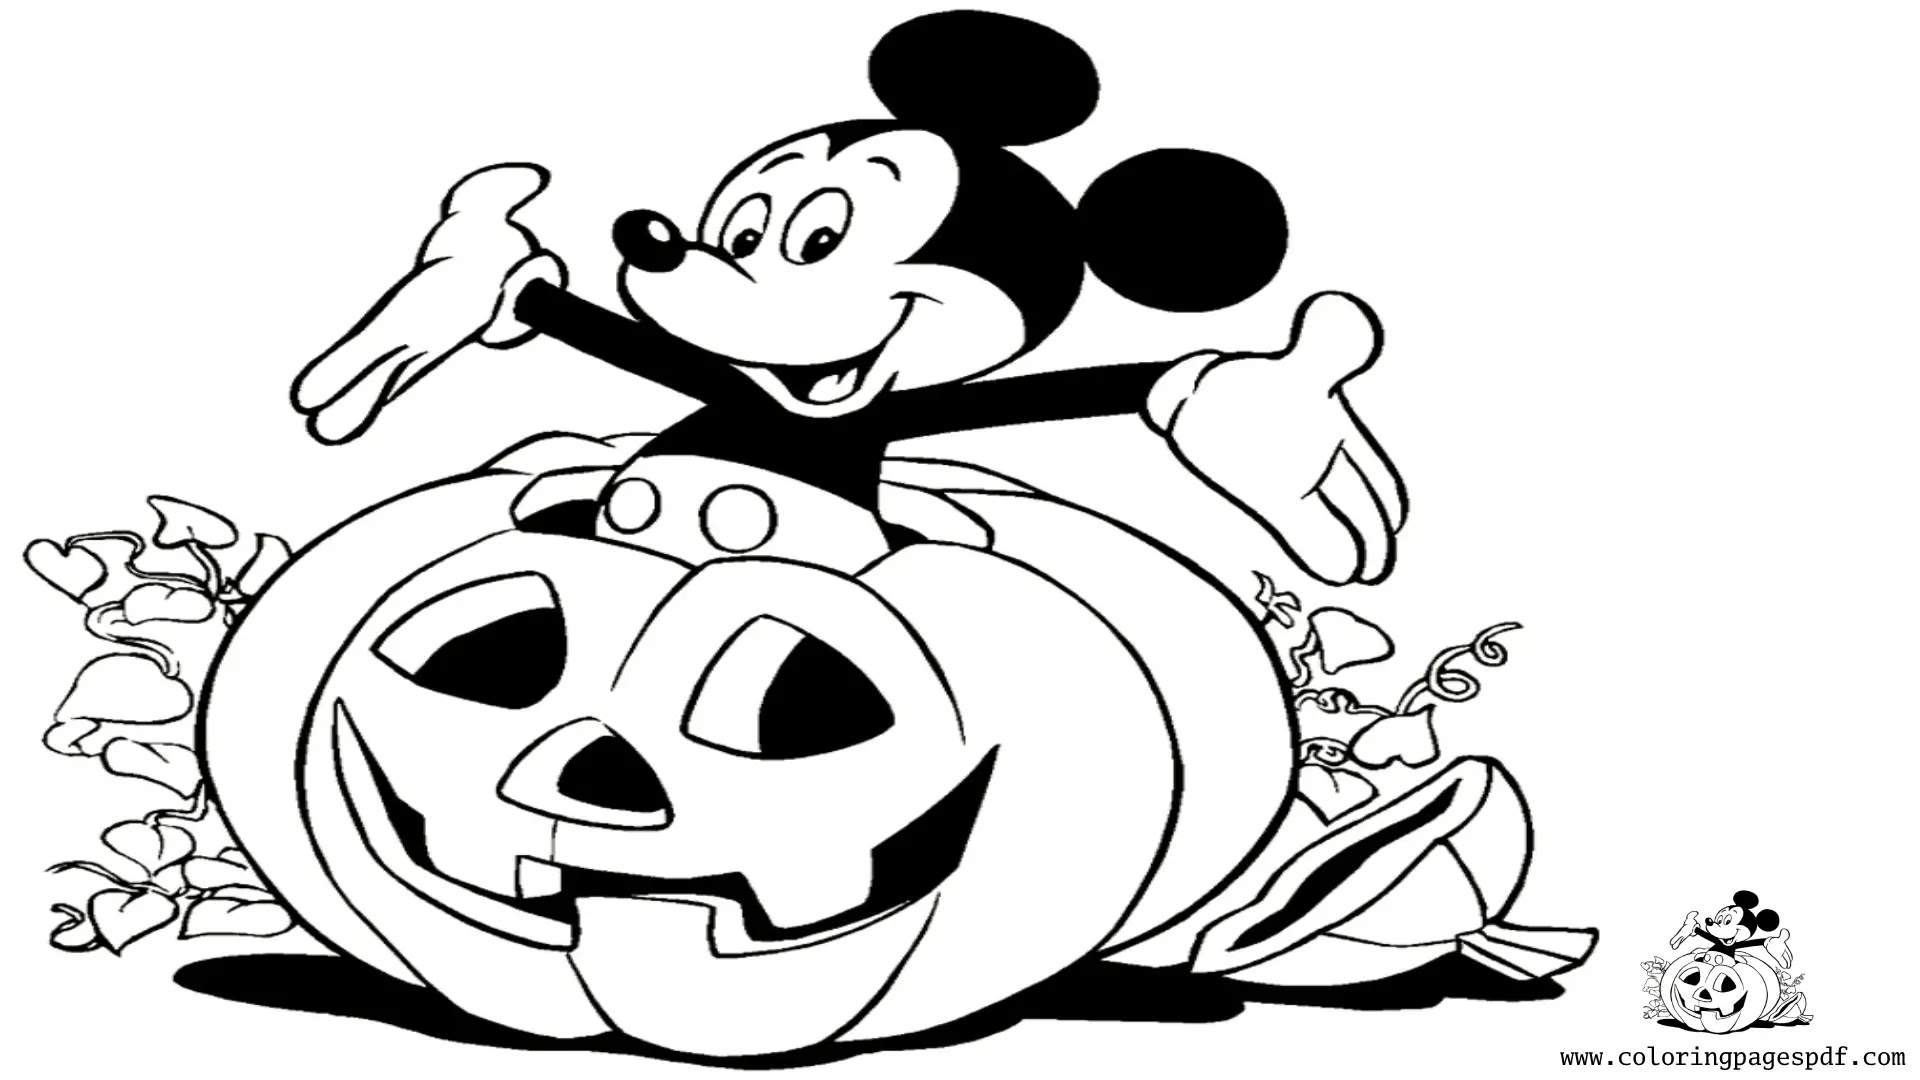 Coloring Page Of Mickey Mouse In A Pumpkin